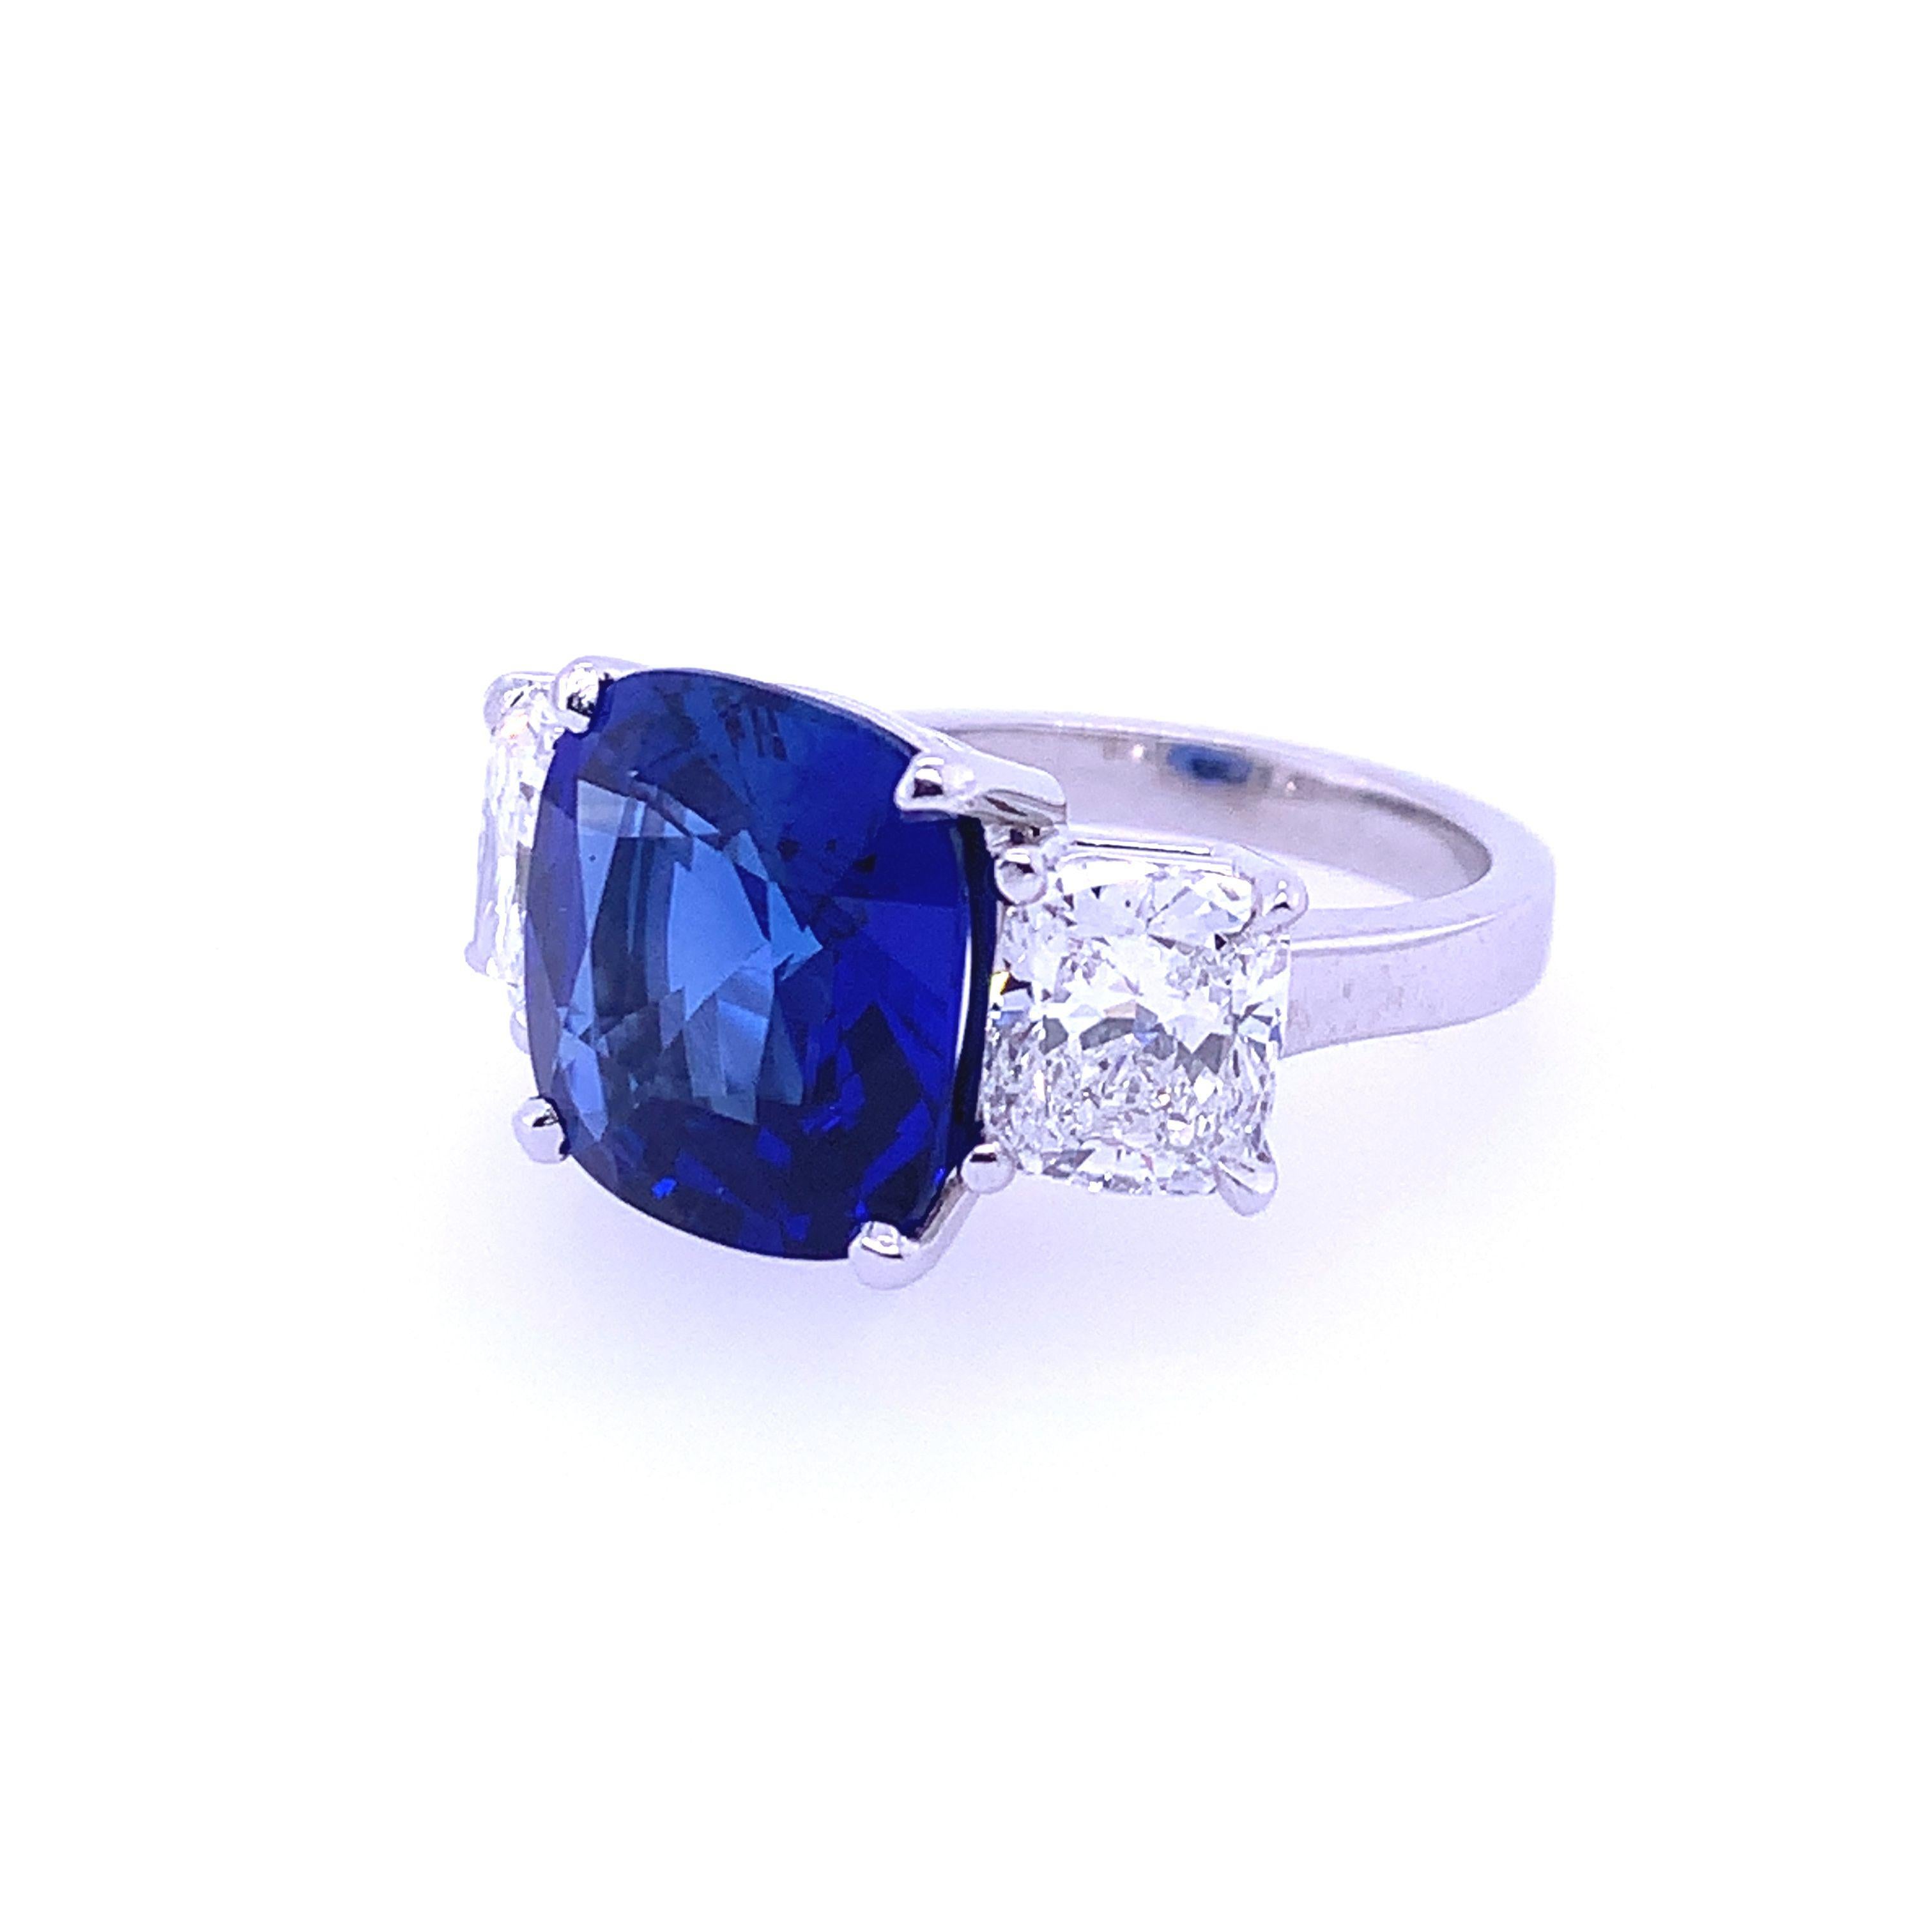 Featuring two rich cushion shaped diamonds precisely cut to frame a dazzling Ceylon Sapphire center stone, this platinum Three Stone ring captures timeless beauty and attention to detail. Showcasing an AGL Certified vividly blue cushion-cut sapphire